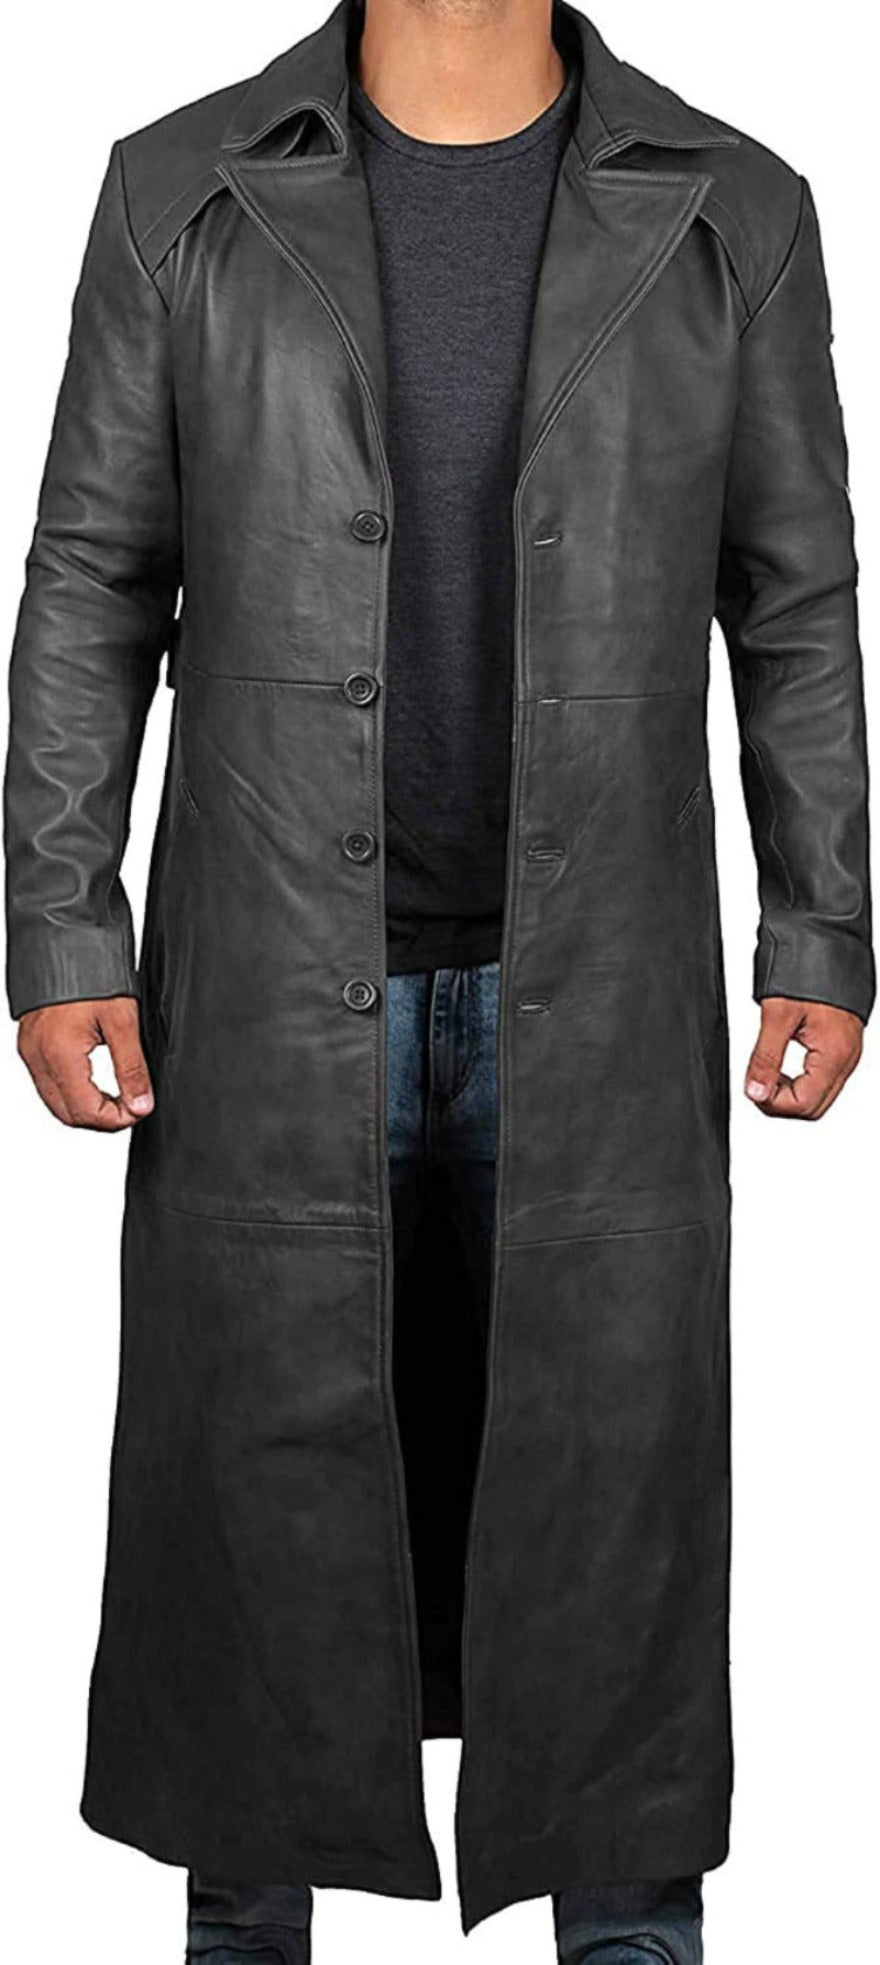 mens black leather trench coat full length Front view